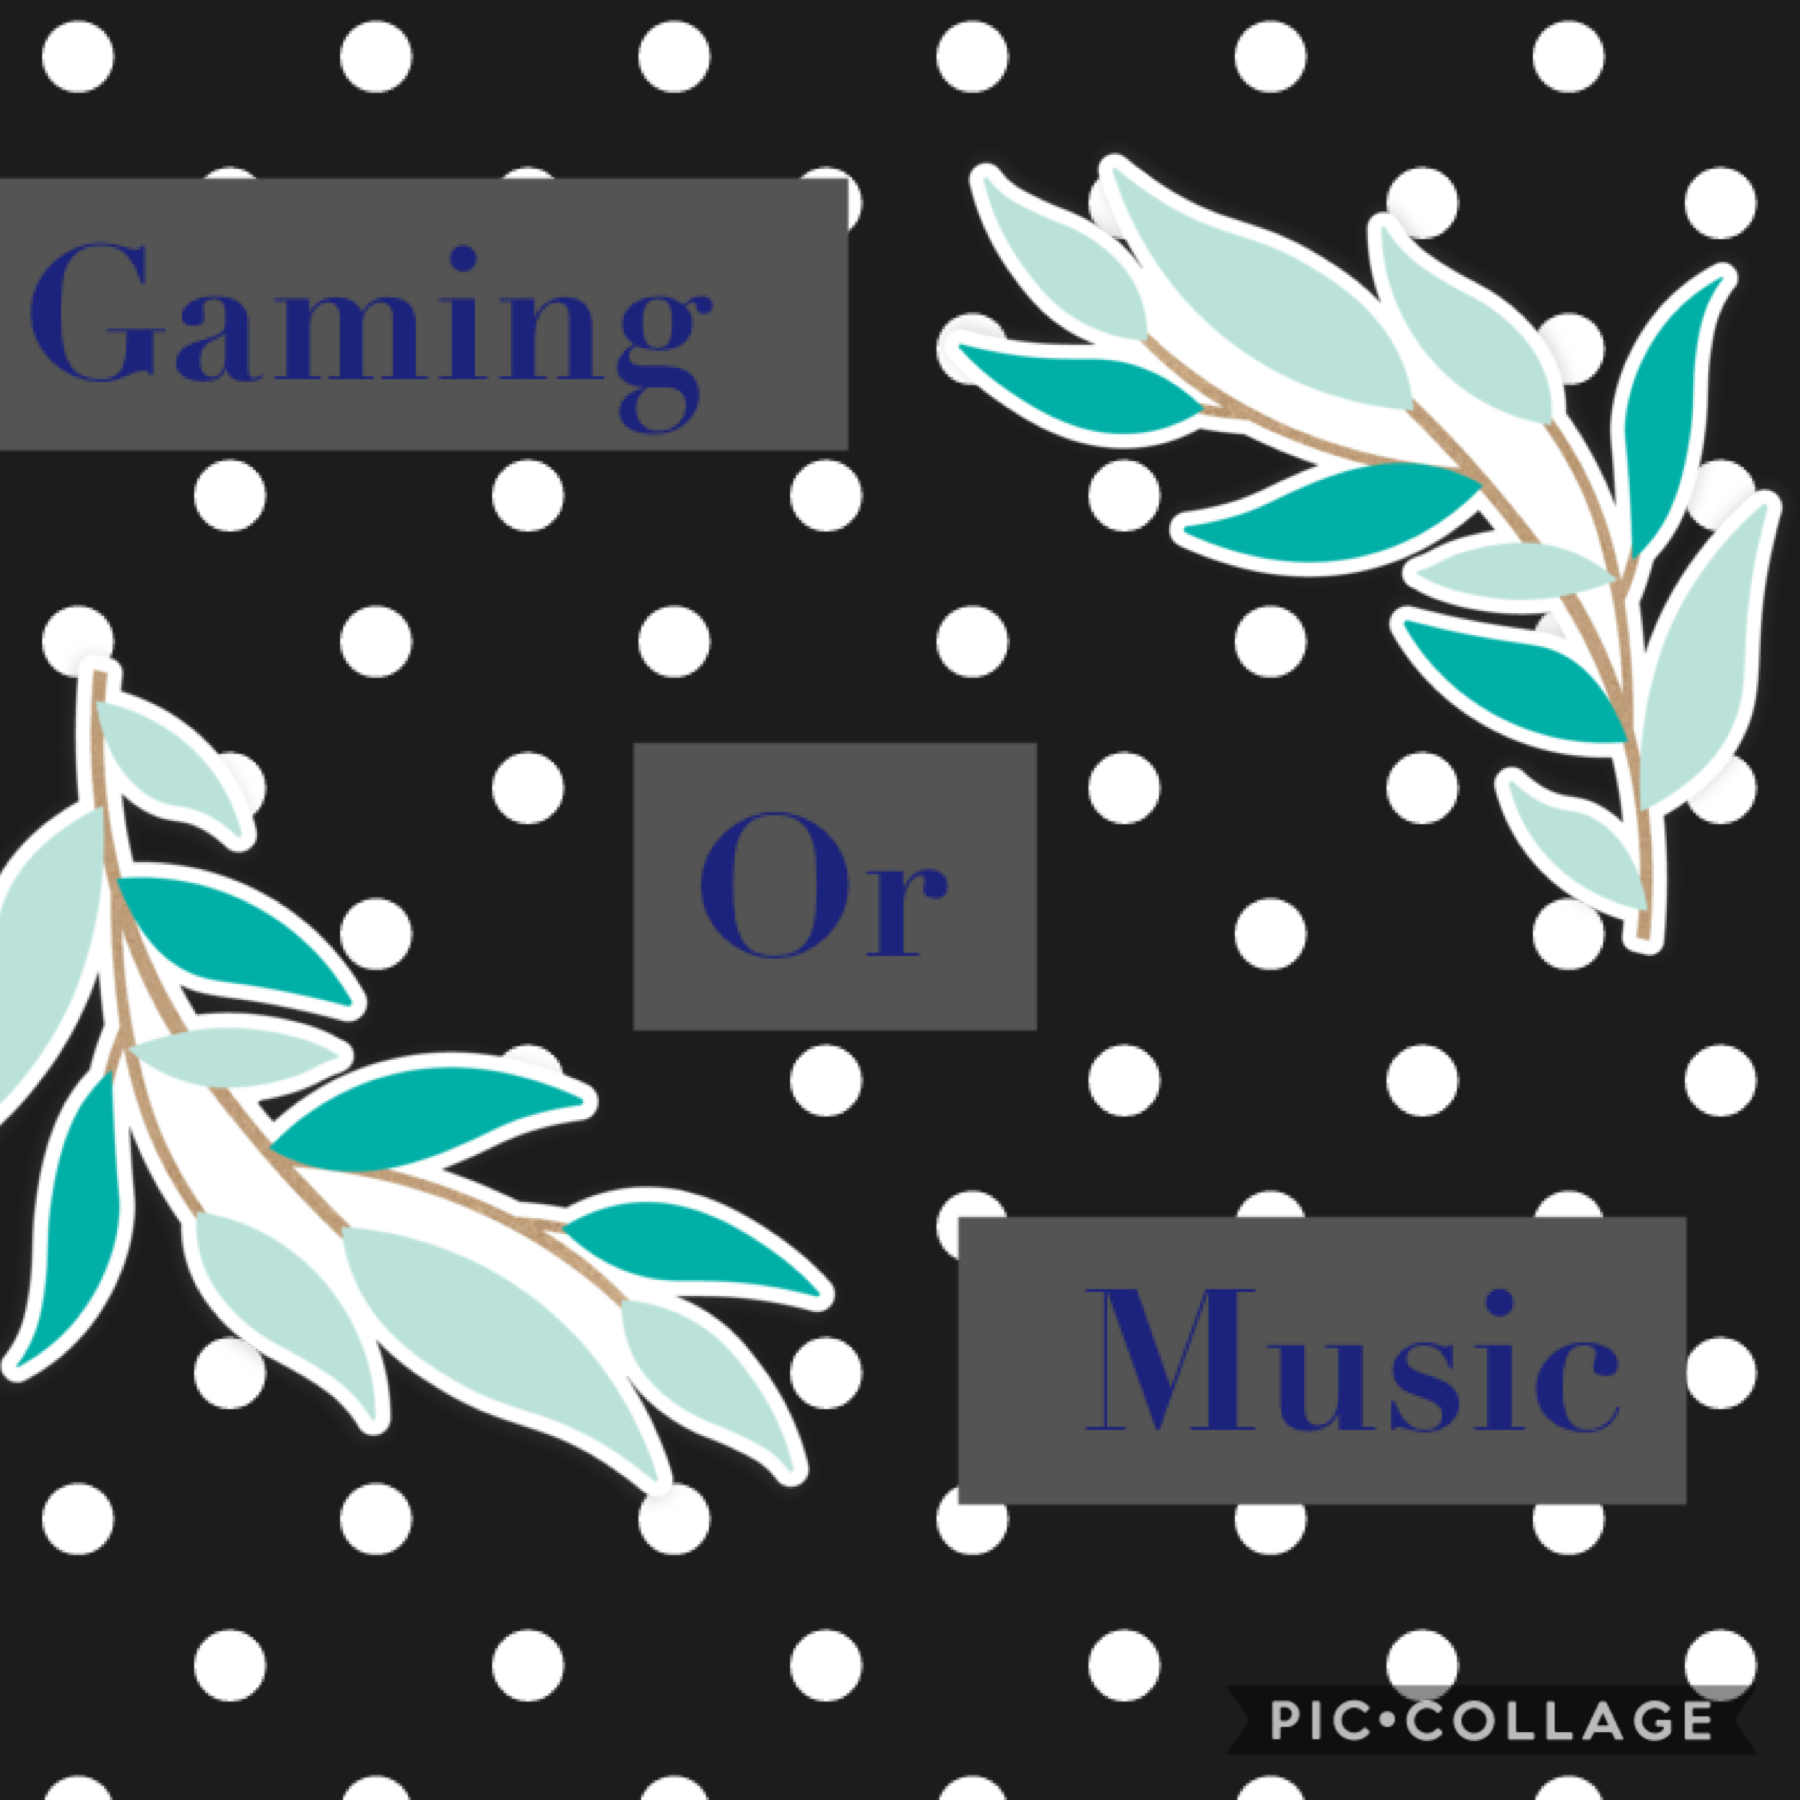 Comment down below which one you like more and if you like these choose one things like